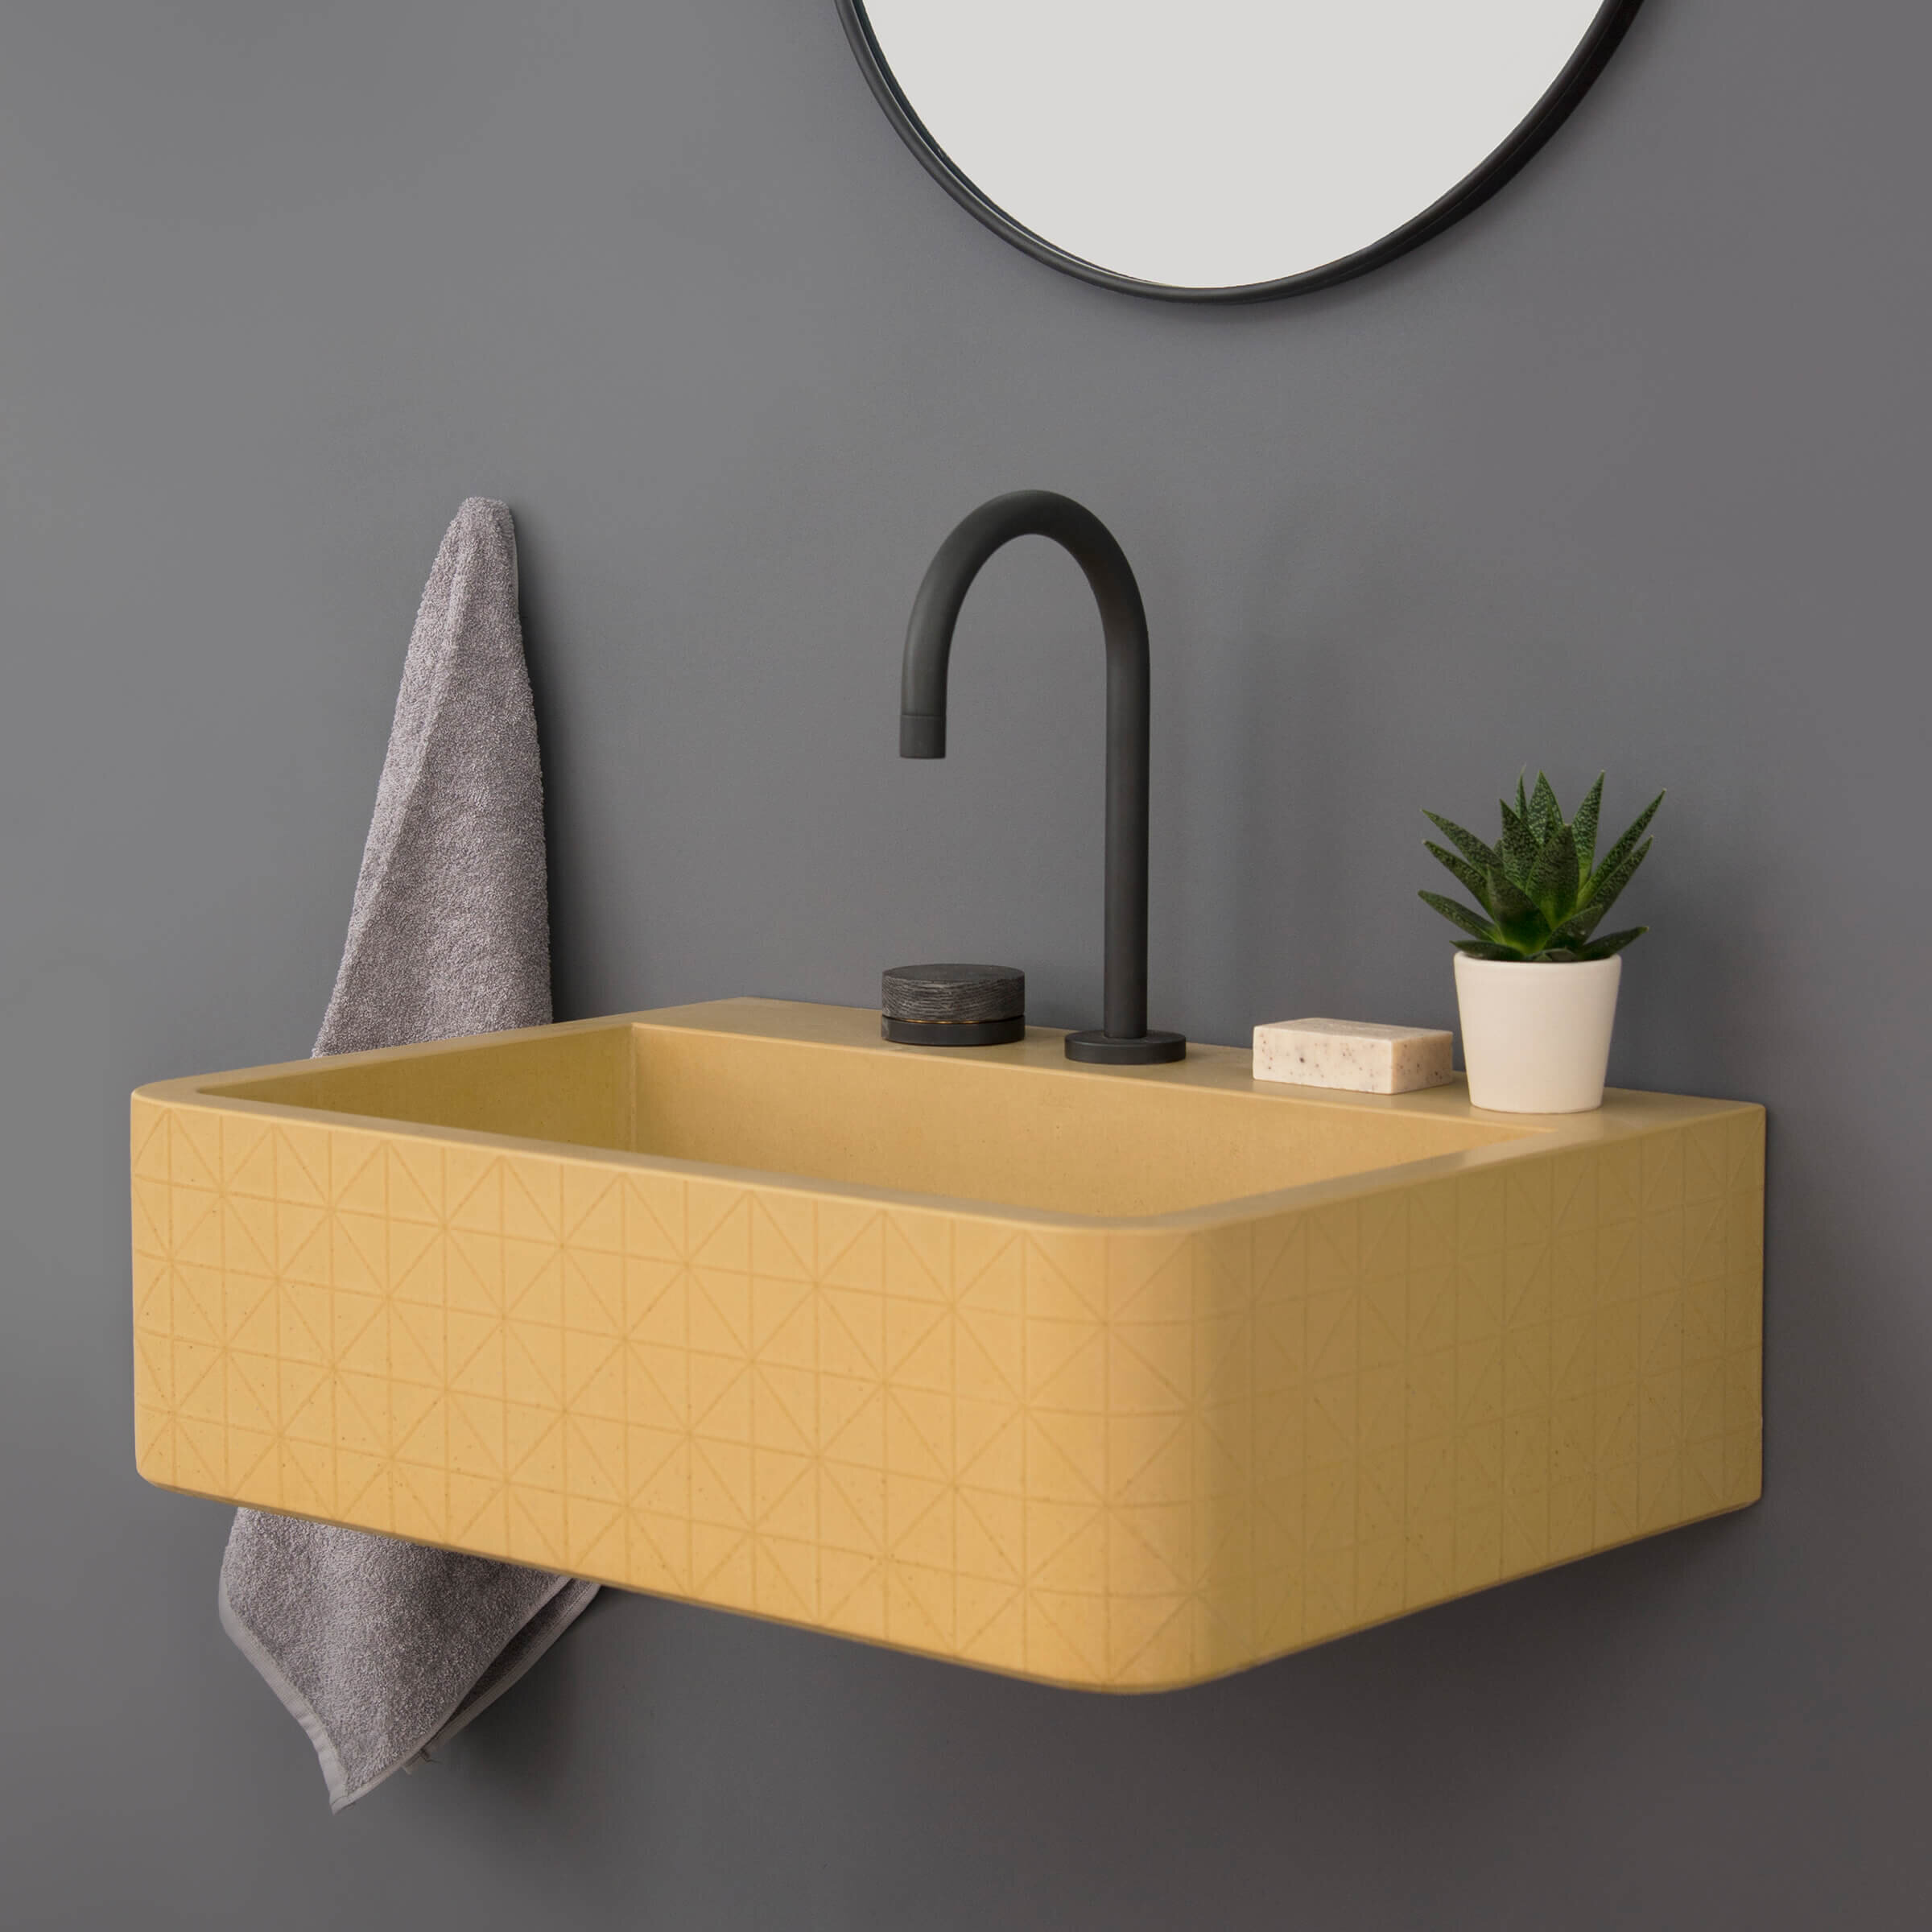 Yellow wall-mounted concrete washbasin sink with a decorative geometric surface pattern and contemporary bathroom accessories..  (Copy)